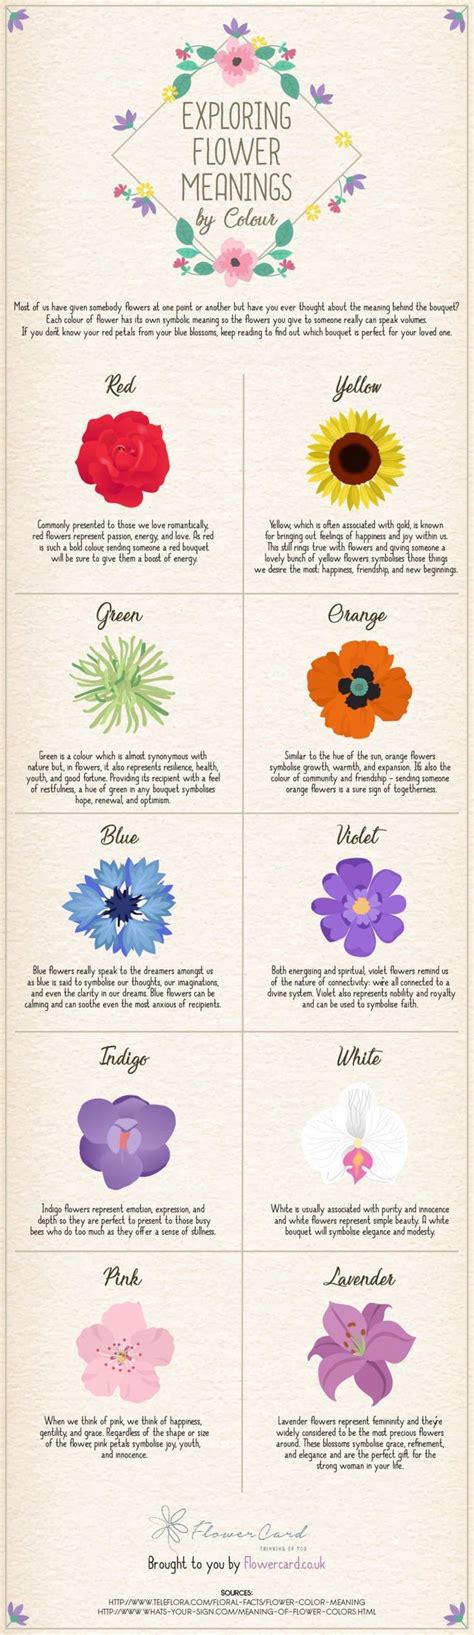 Exploring Flower Meanings By Colour Infographic Flower Meanings